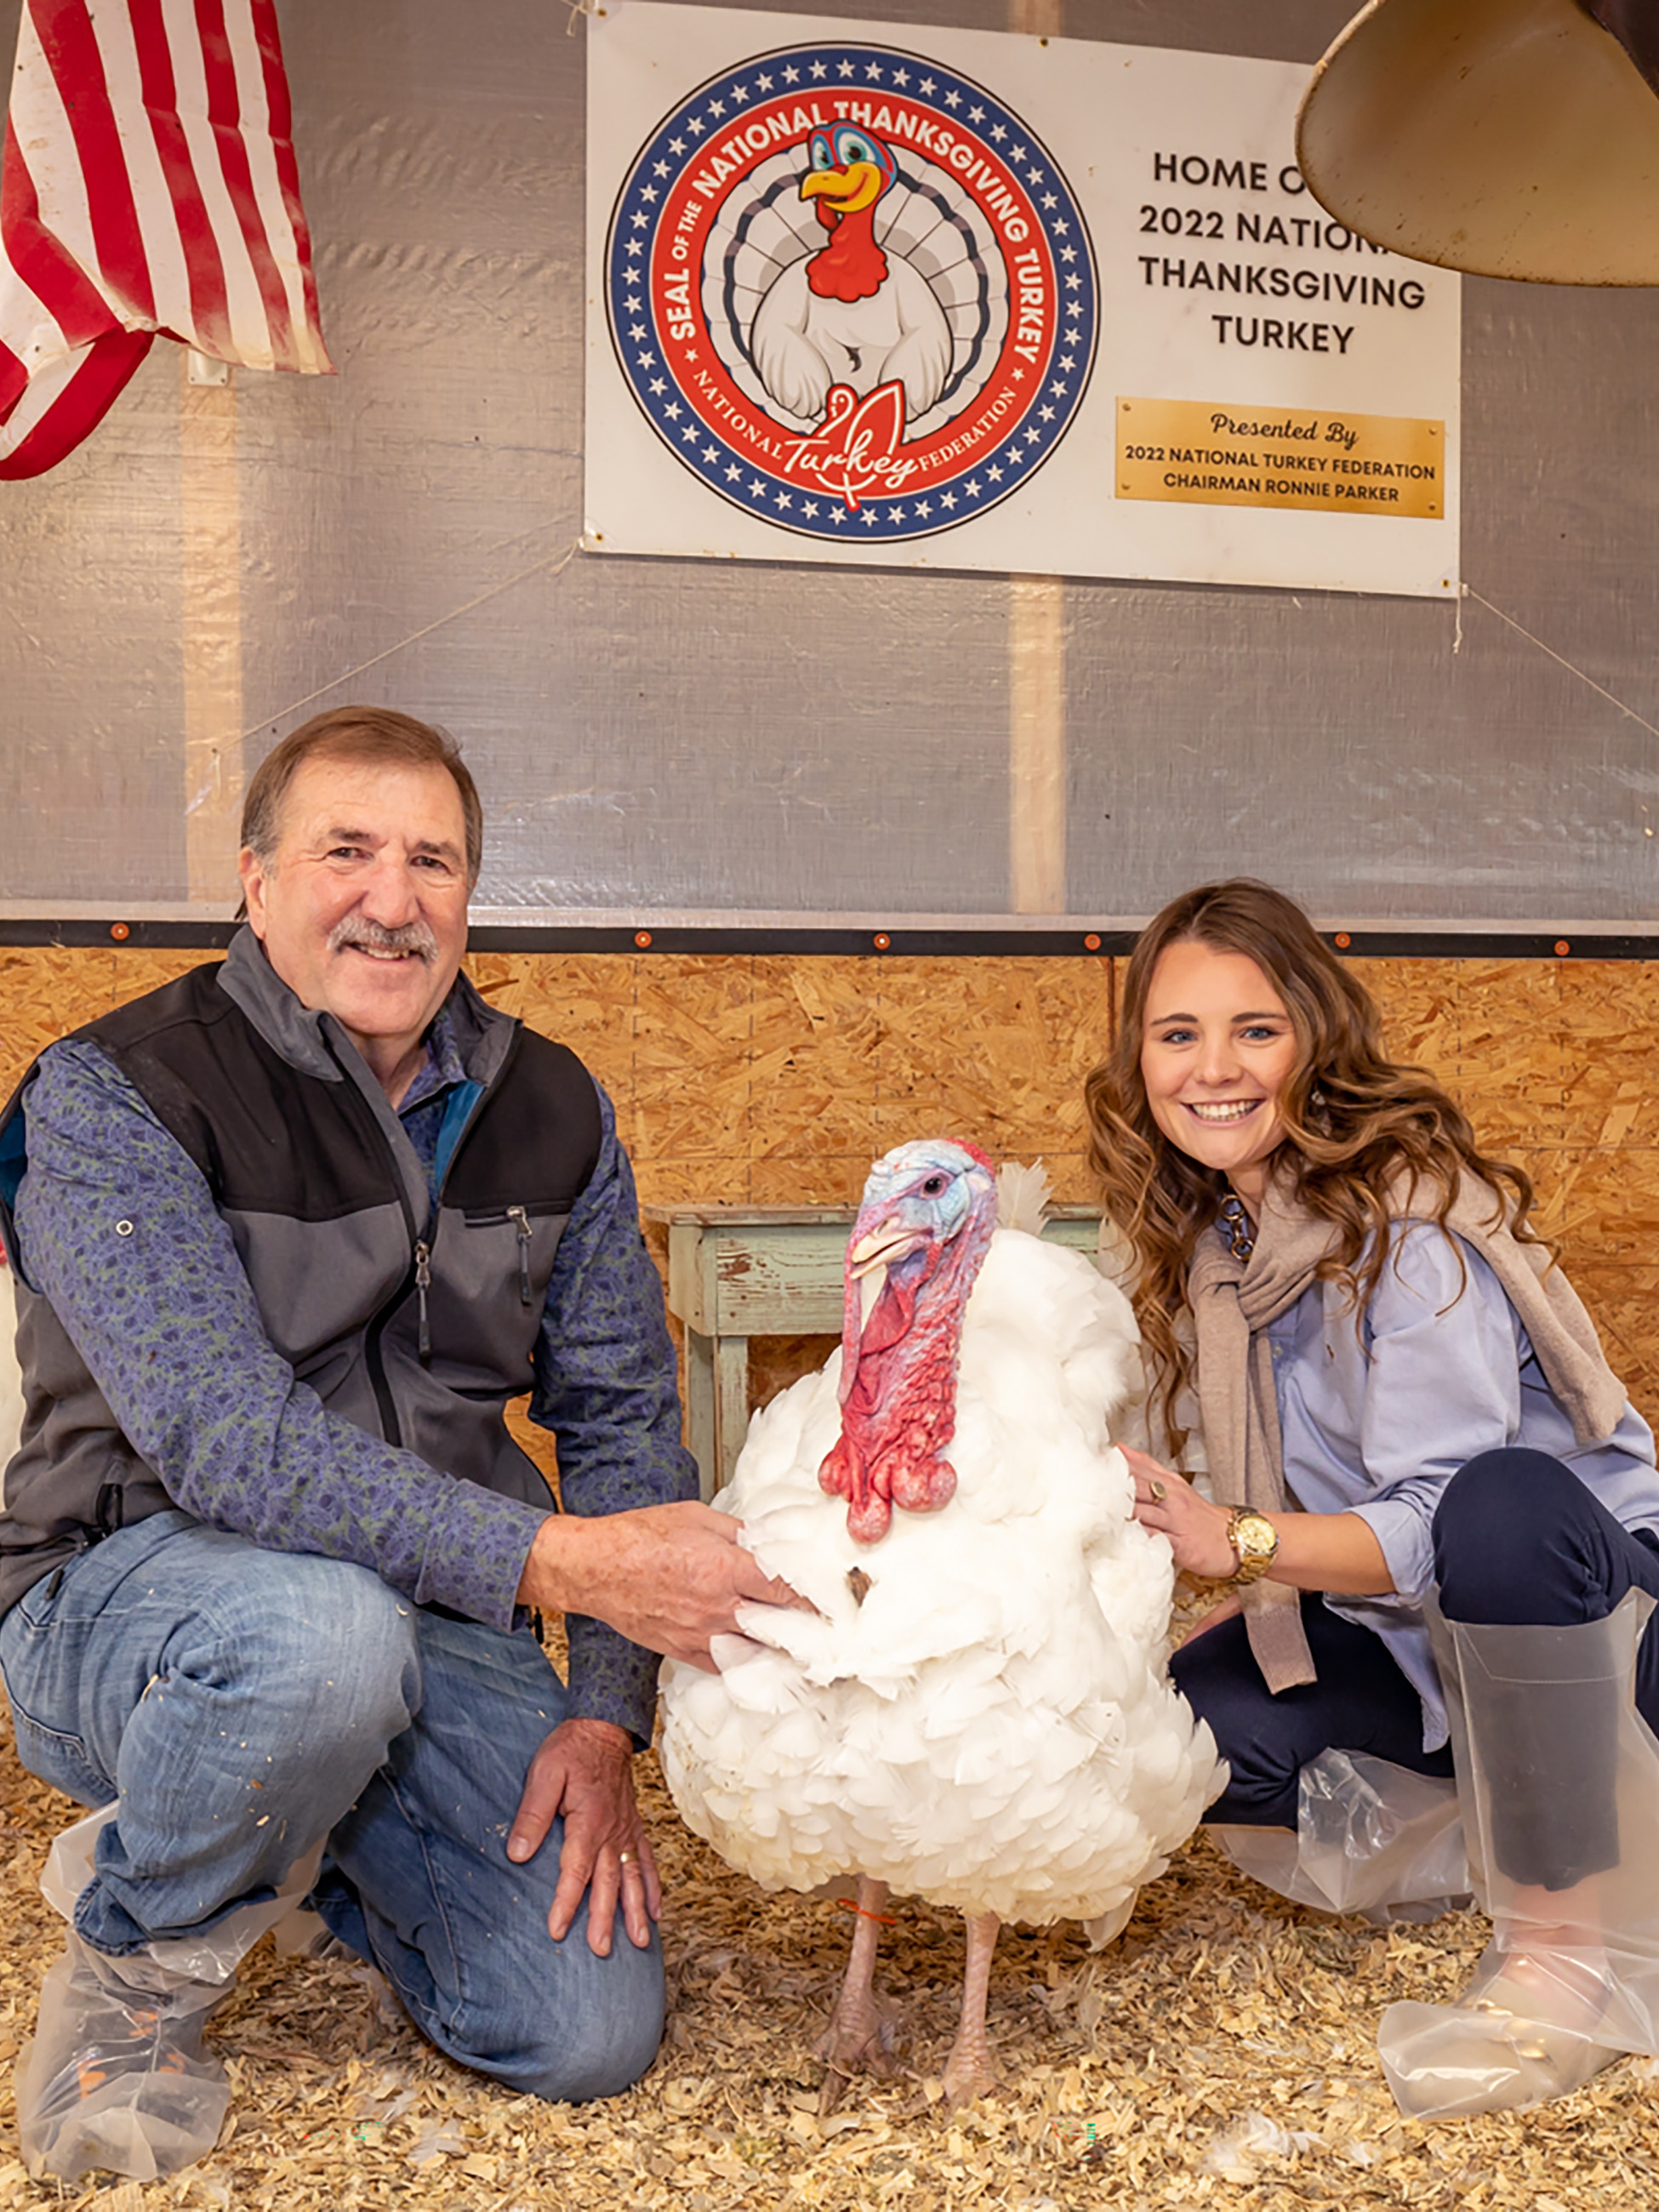 Ronnie Parker and Lexie Starnes pose with members of the Presidential Flock on the farm in North Carolina.